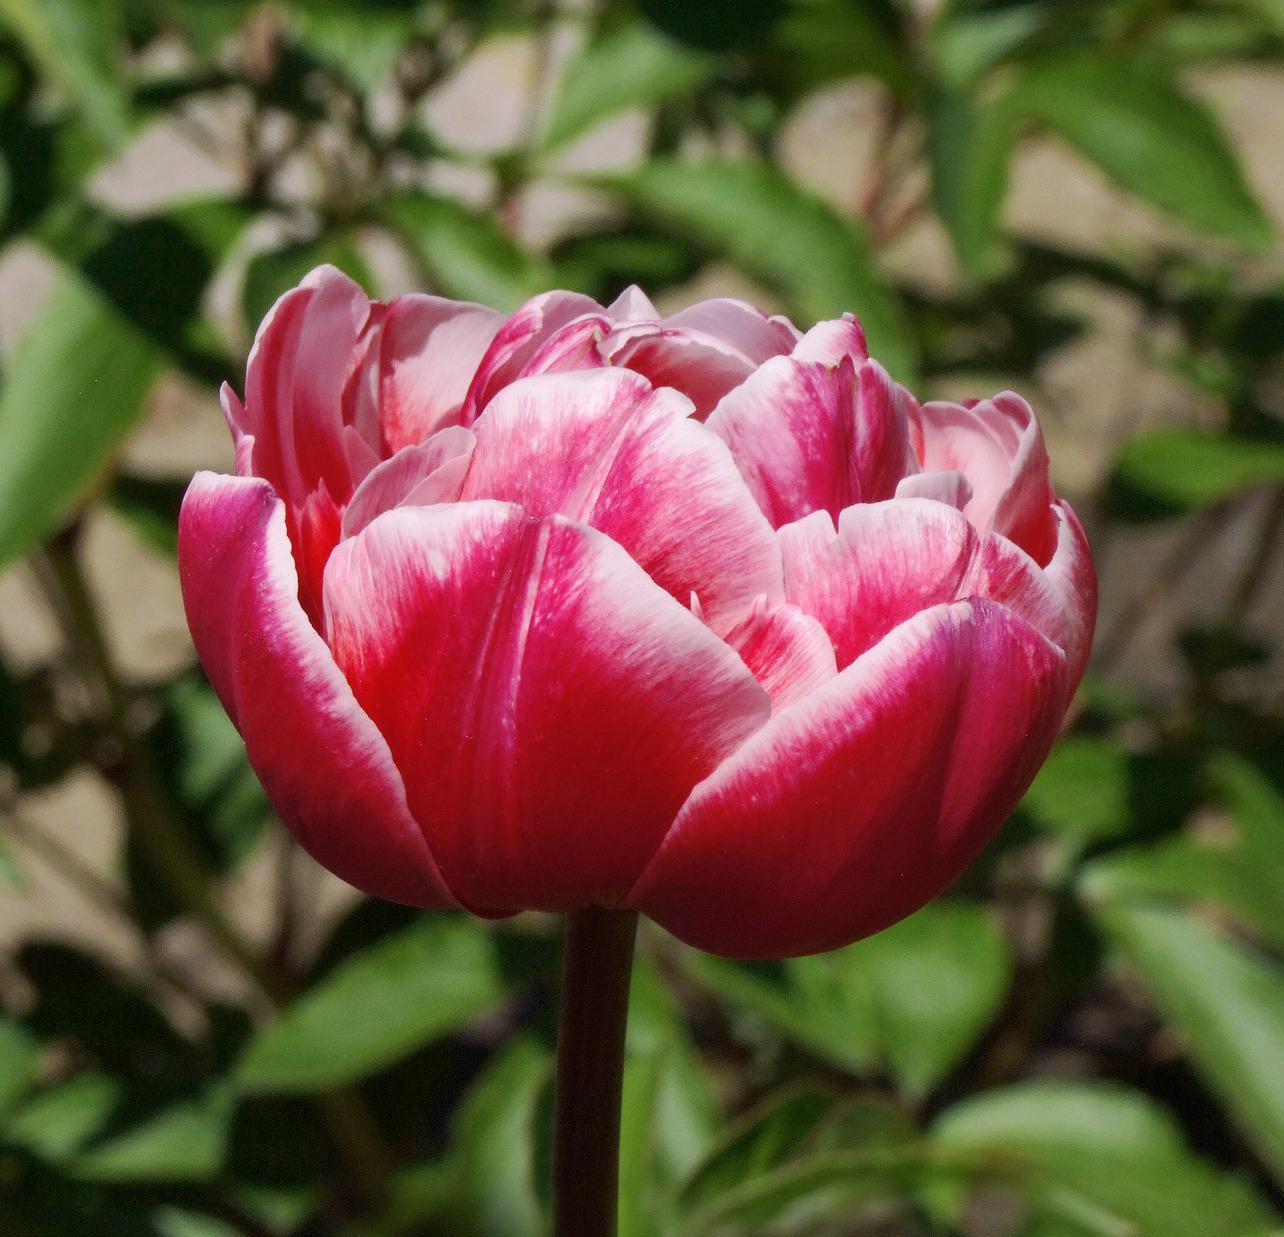 Tulip Double Late 'Drumline' - Tulip - Pre-Order for Fall 2022 from Leo Berbee Bulb Company